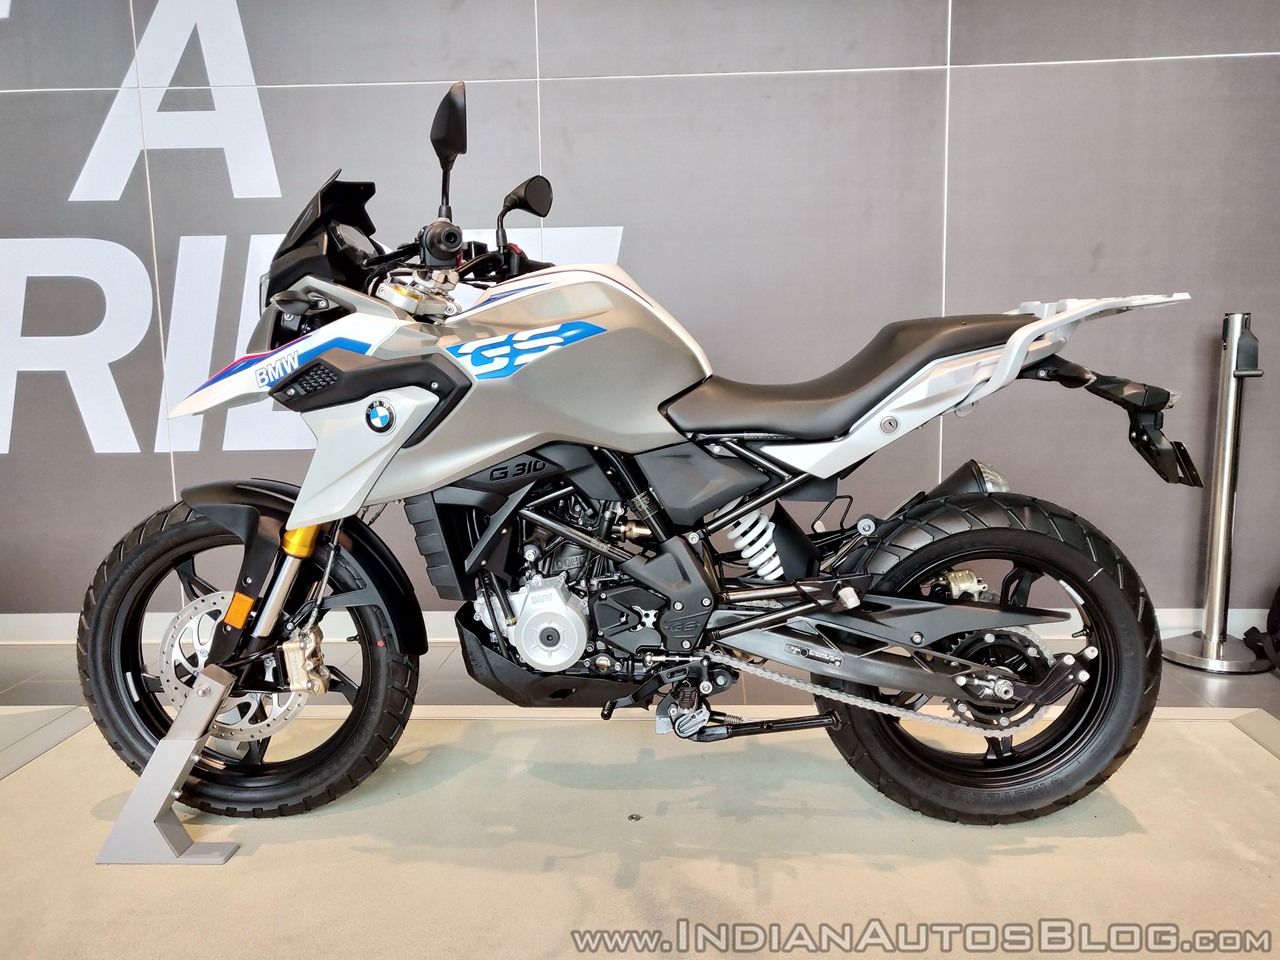 BMW G 310 R & BMW G 310 GS receives over 1,000 bookings in India